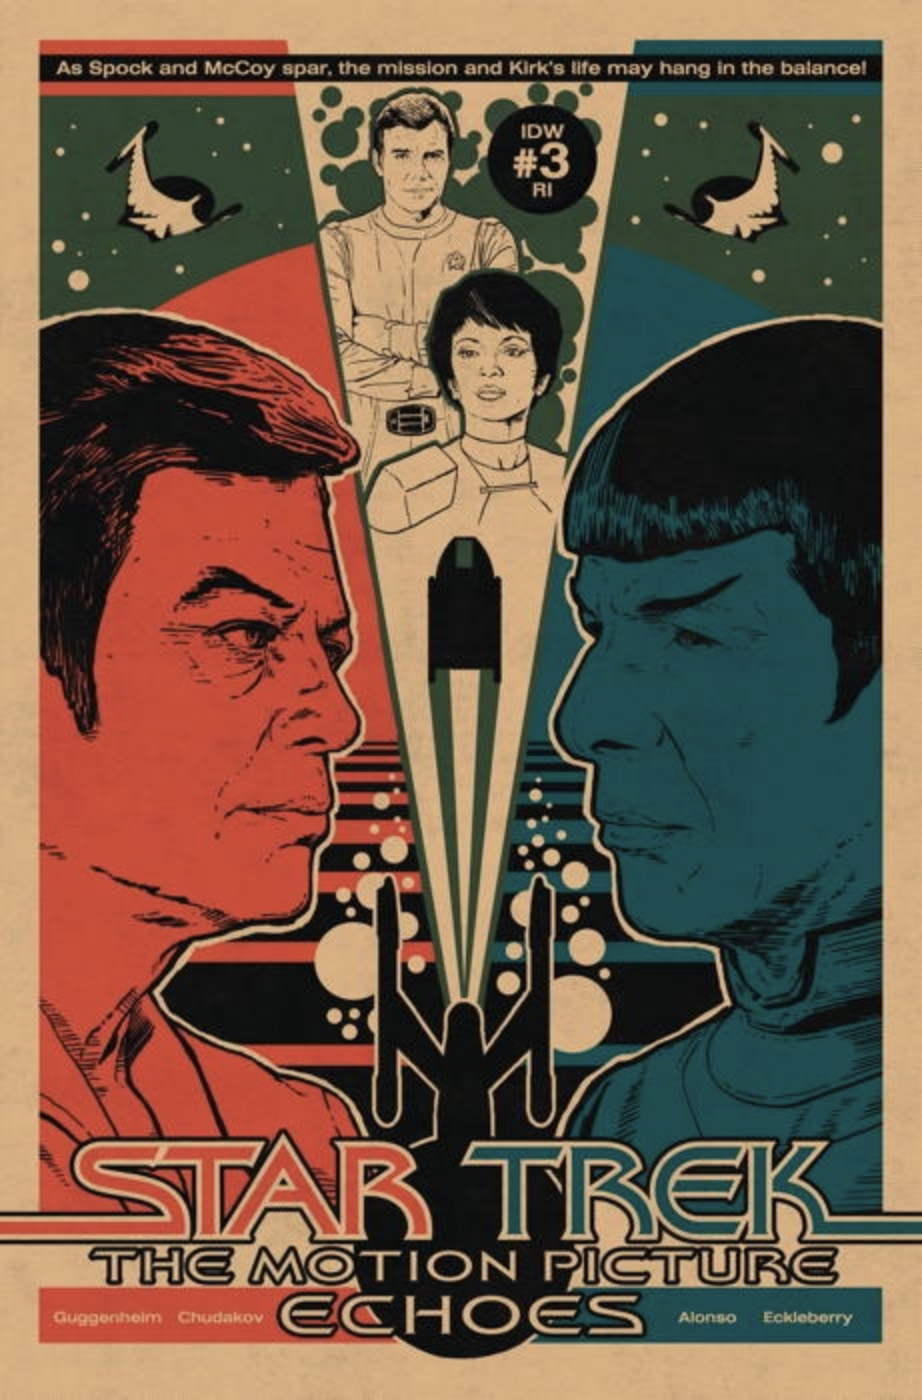 IDW Star Trek: The Motion Picture - Echoes 3RIB